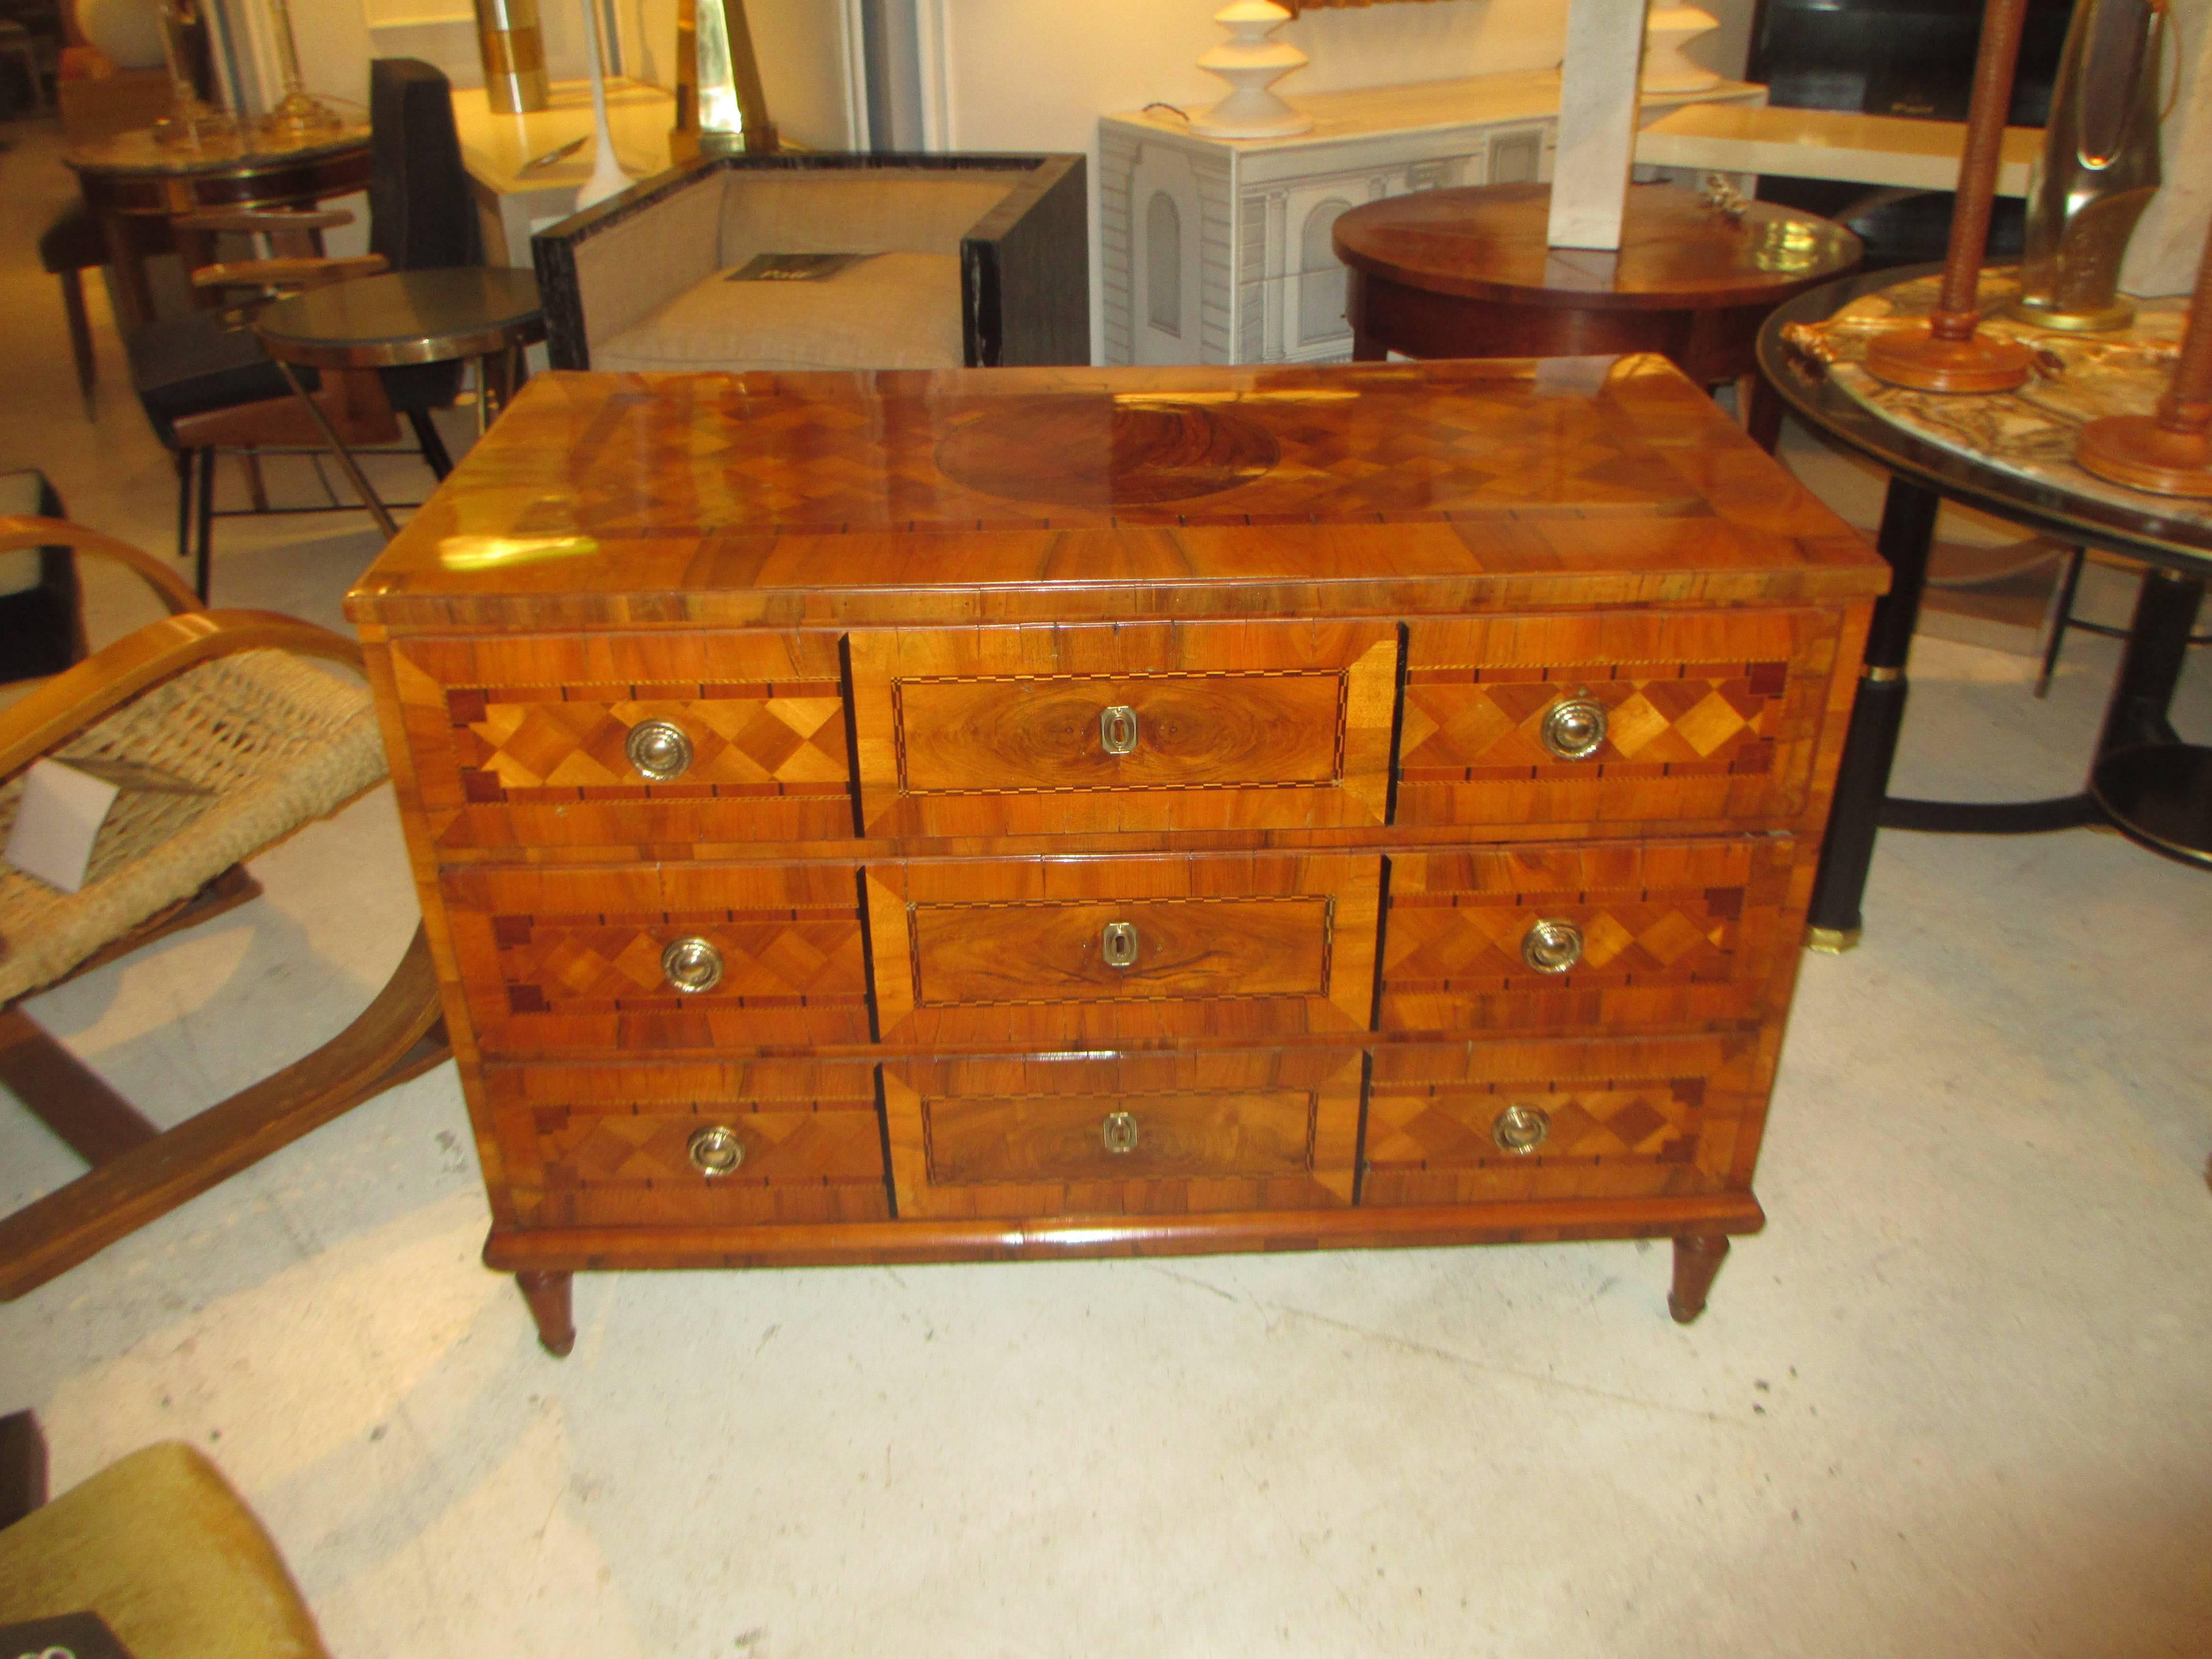 Antique  Neapolitan Parquetry Commode With Three Central Drawers. The Exquisite Geometric  Parquetry Inlay Consisting of Walnut, Mahogany, Rosewood, Ebony among other types of woods